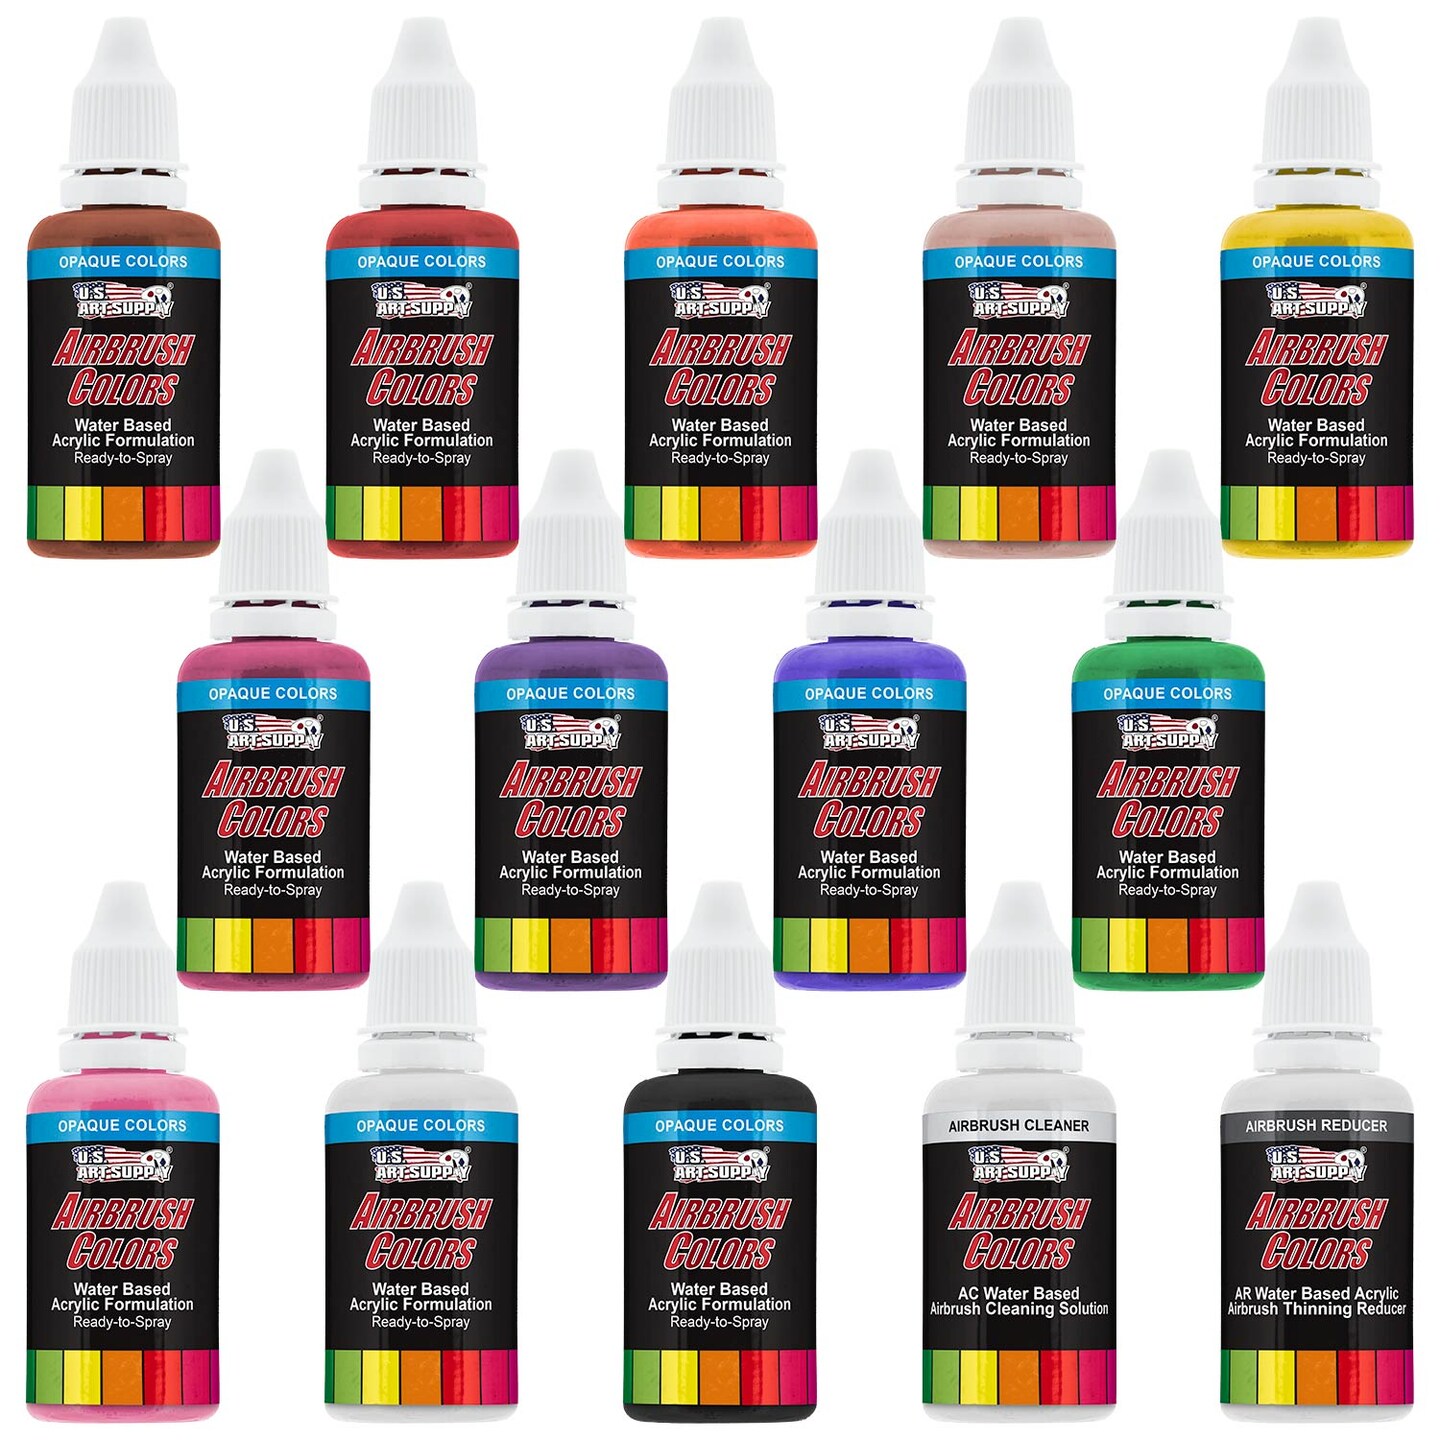 12 Color Primary Opaque Colors Acrylic Airbrush Paint Set with Reducer &#x26; Cleaner, 1 oz. Bottles